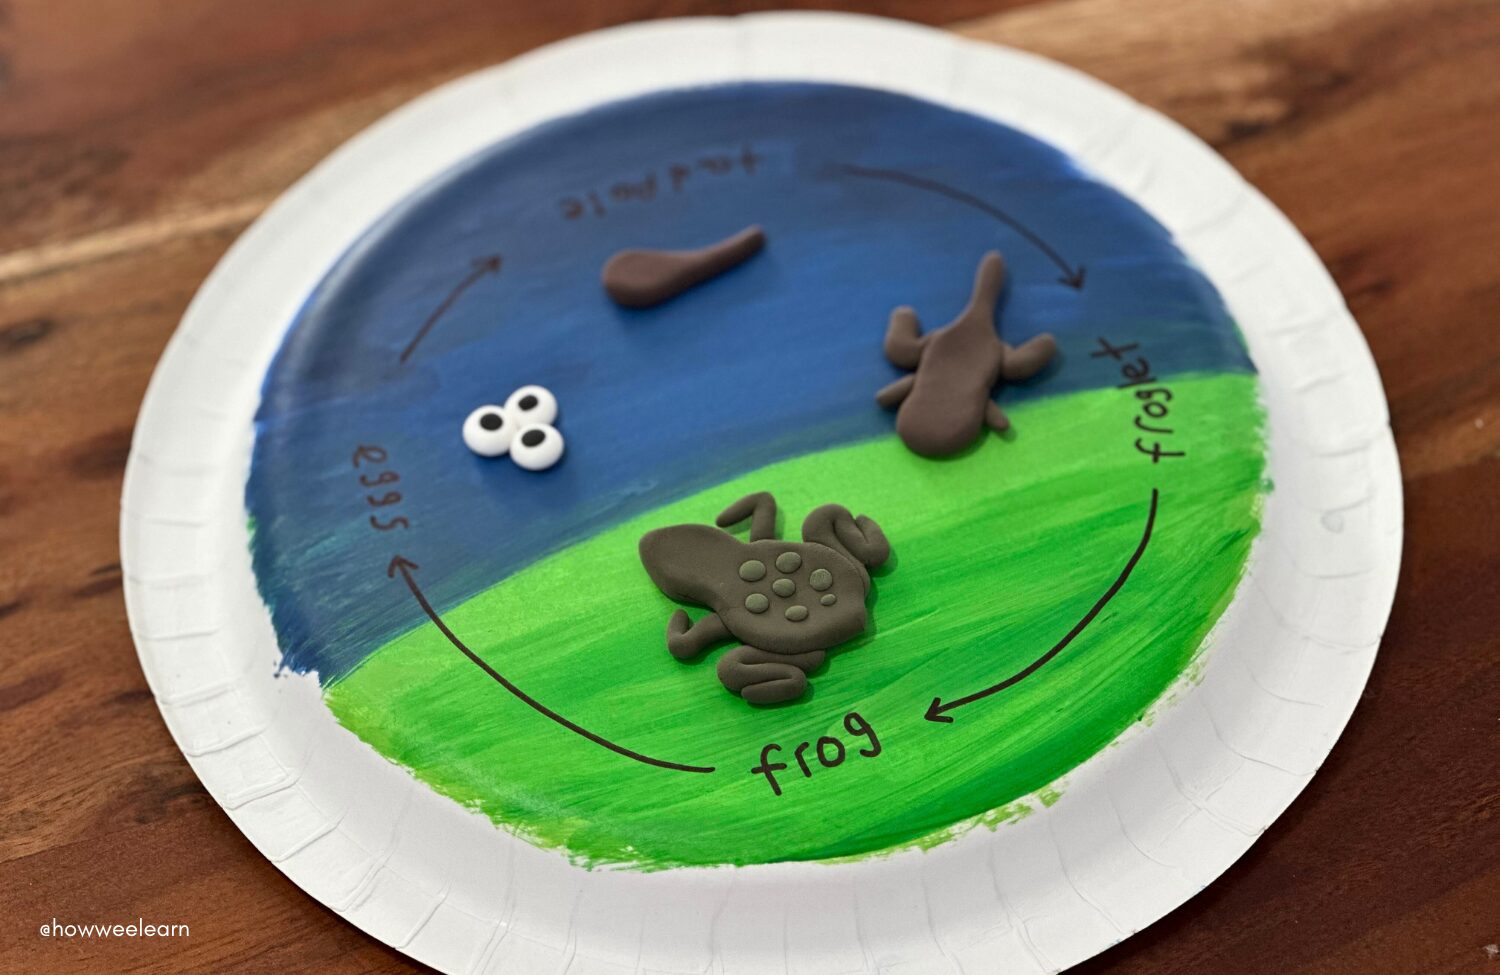 Frog life cycle made out of air dry clay on a paper plate